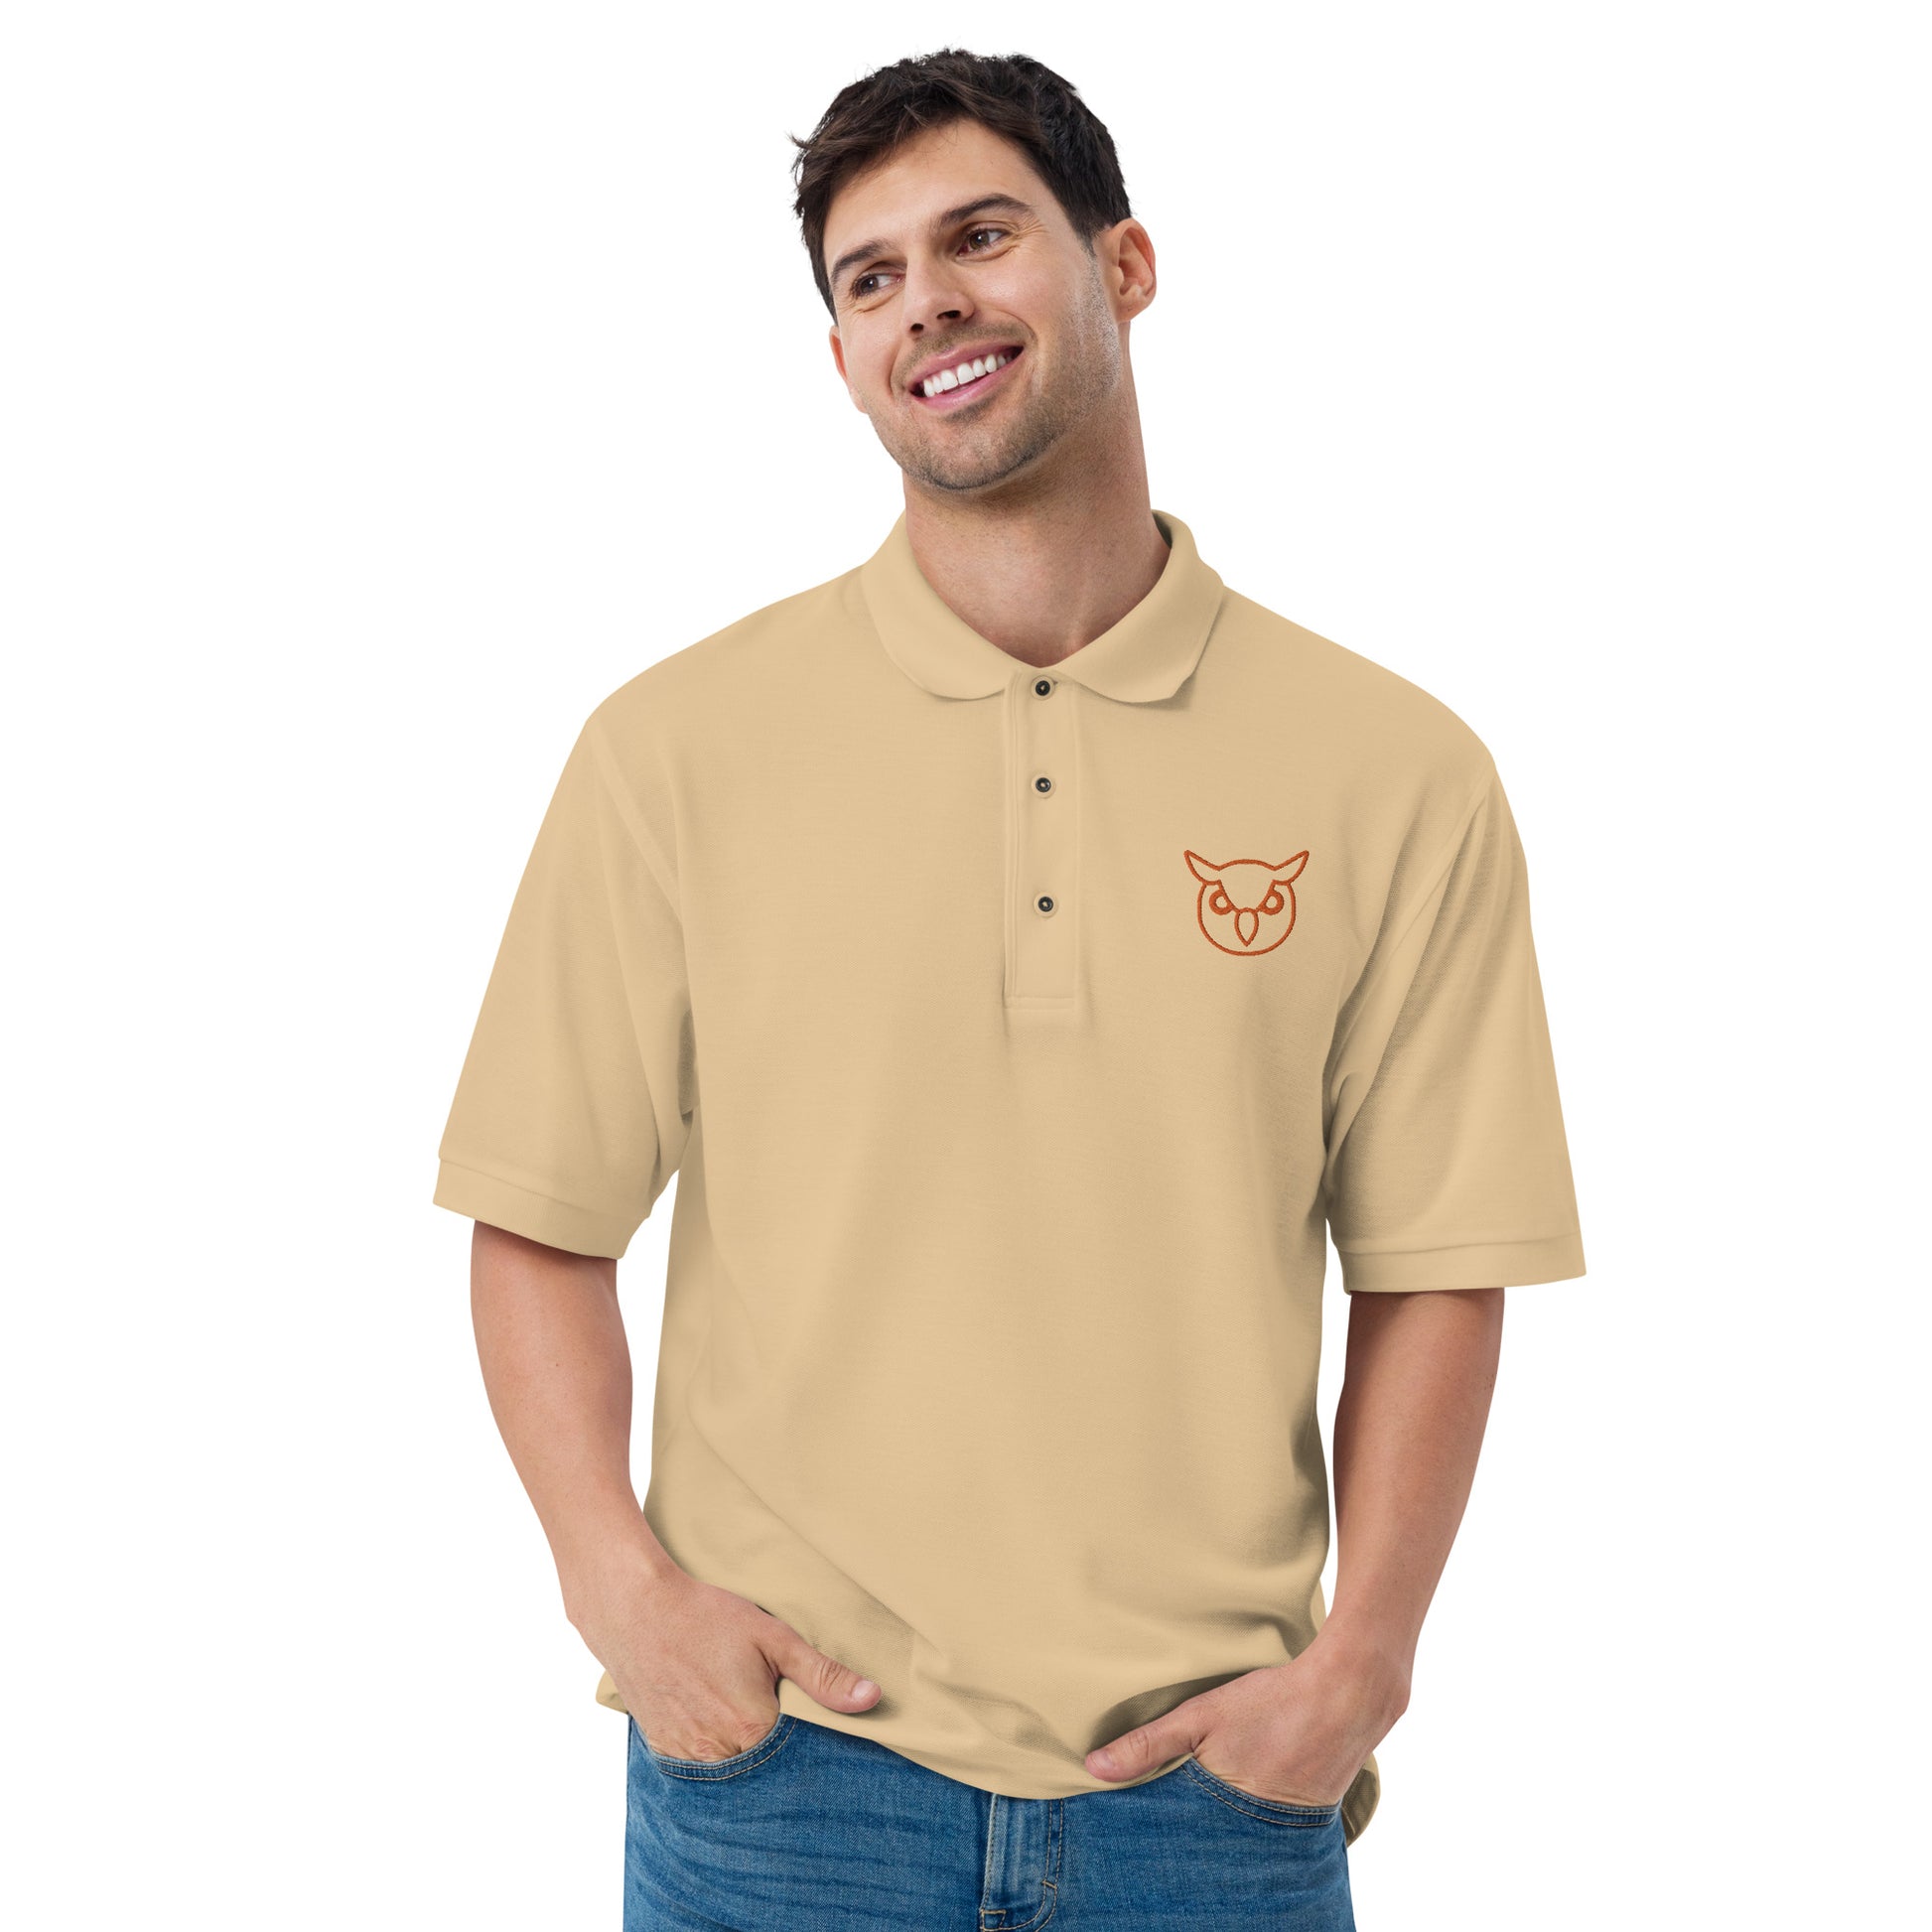 Men with stone poloshirt with on front a owl in brown embroidered